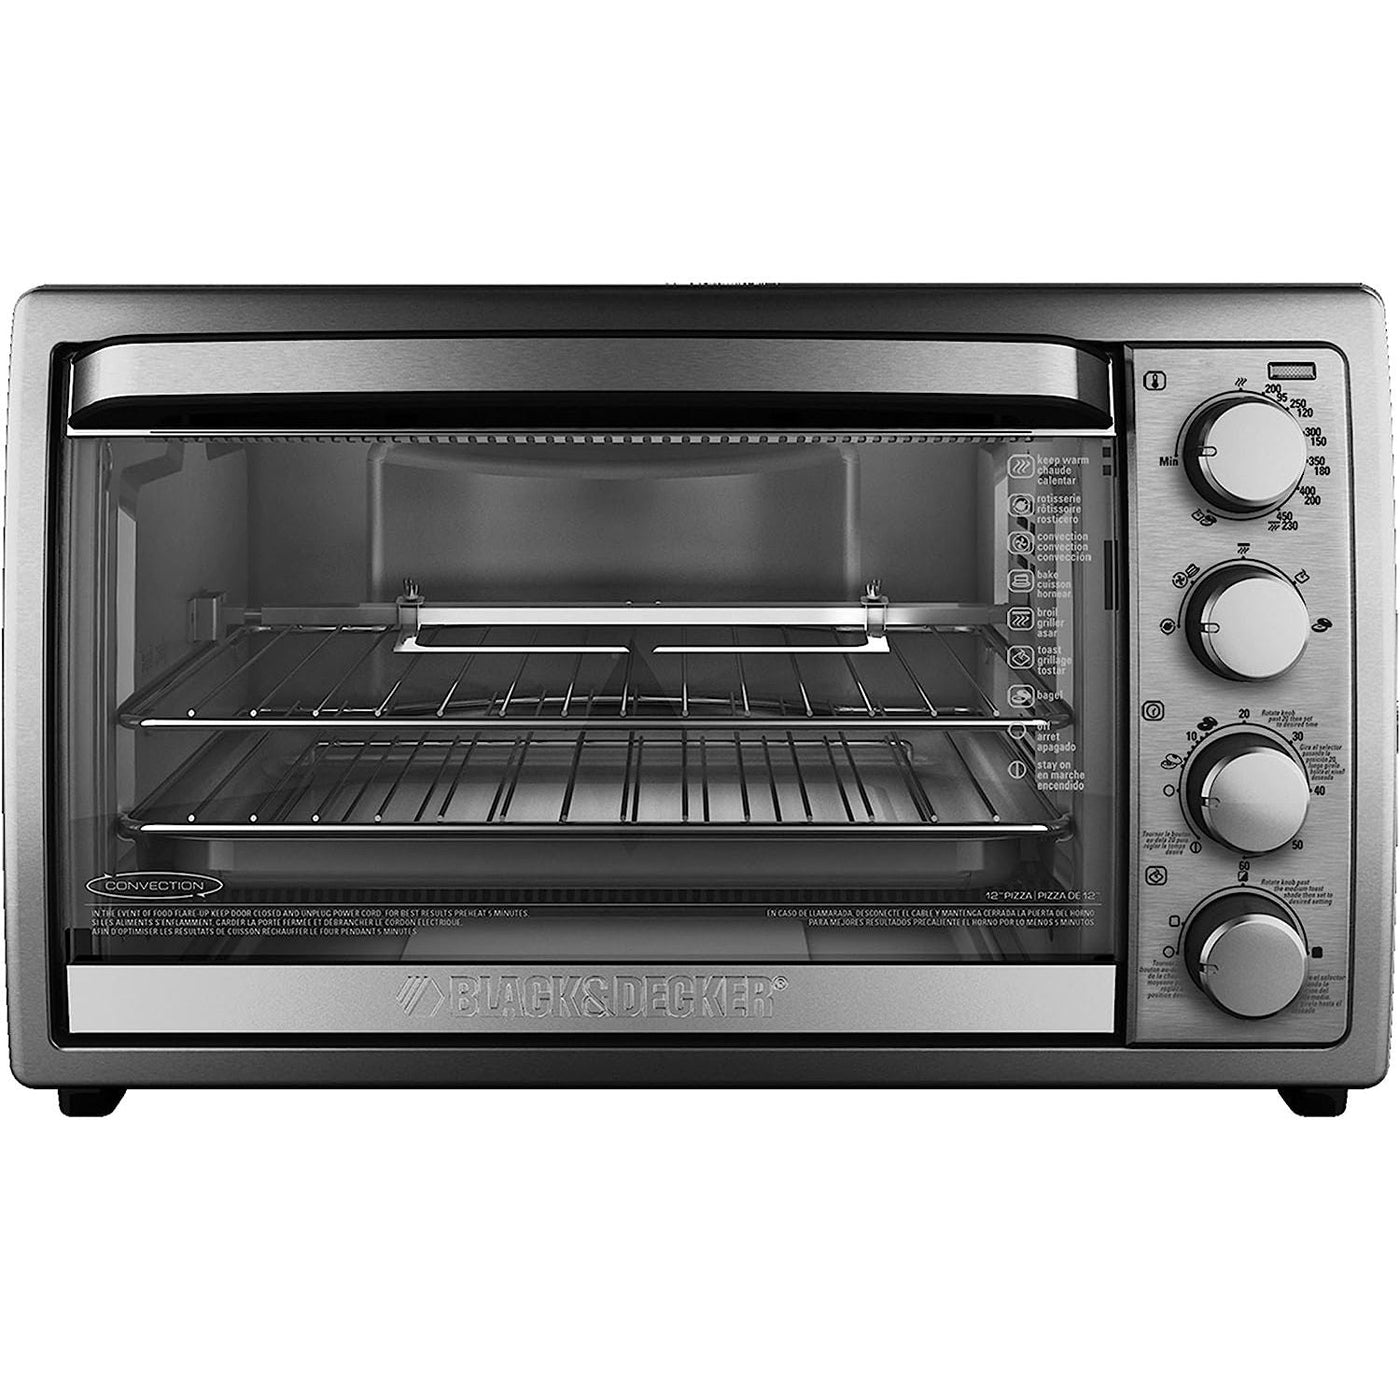 Black + Decker Rotisserie Toaster Oven, 6 Slice, 5 Functions, TO4314SSD - Just Closeouts Canada Inc.050875810051